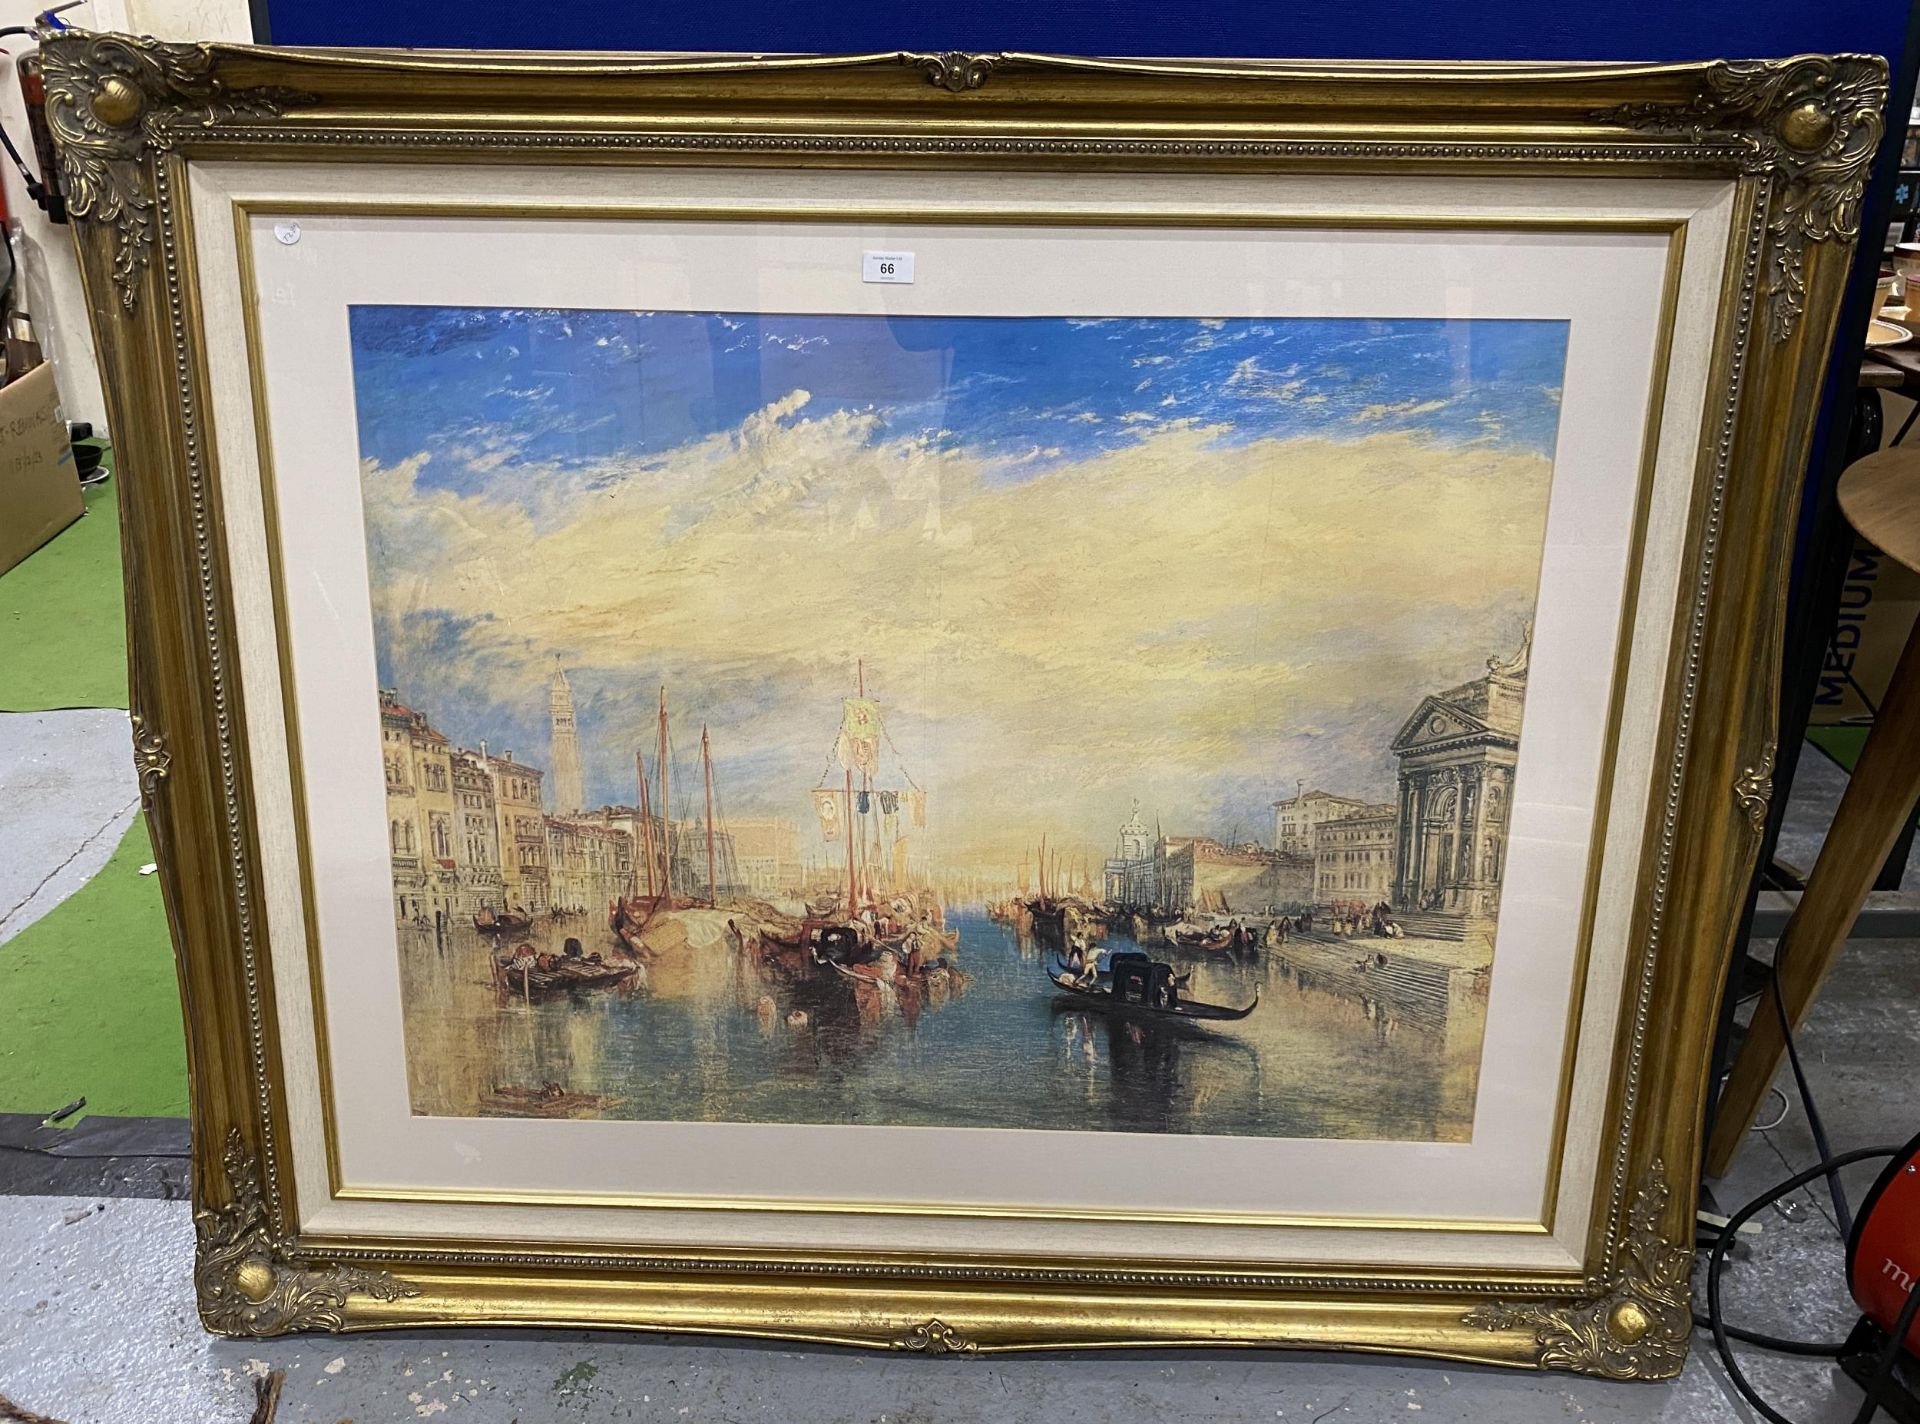 A LARGE GILT FRAMED JOSEPH MALLORD WILLIAM TURNER REPRODUCTION PRINT OF THE GRAND CANAL, VENICE, 106